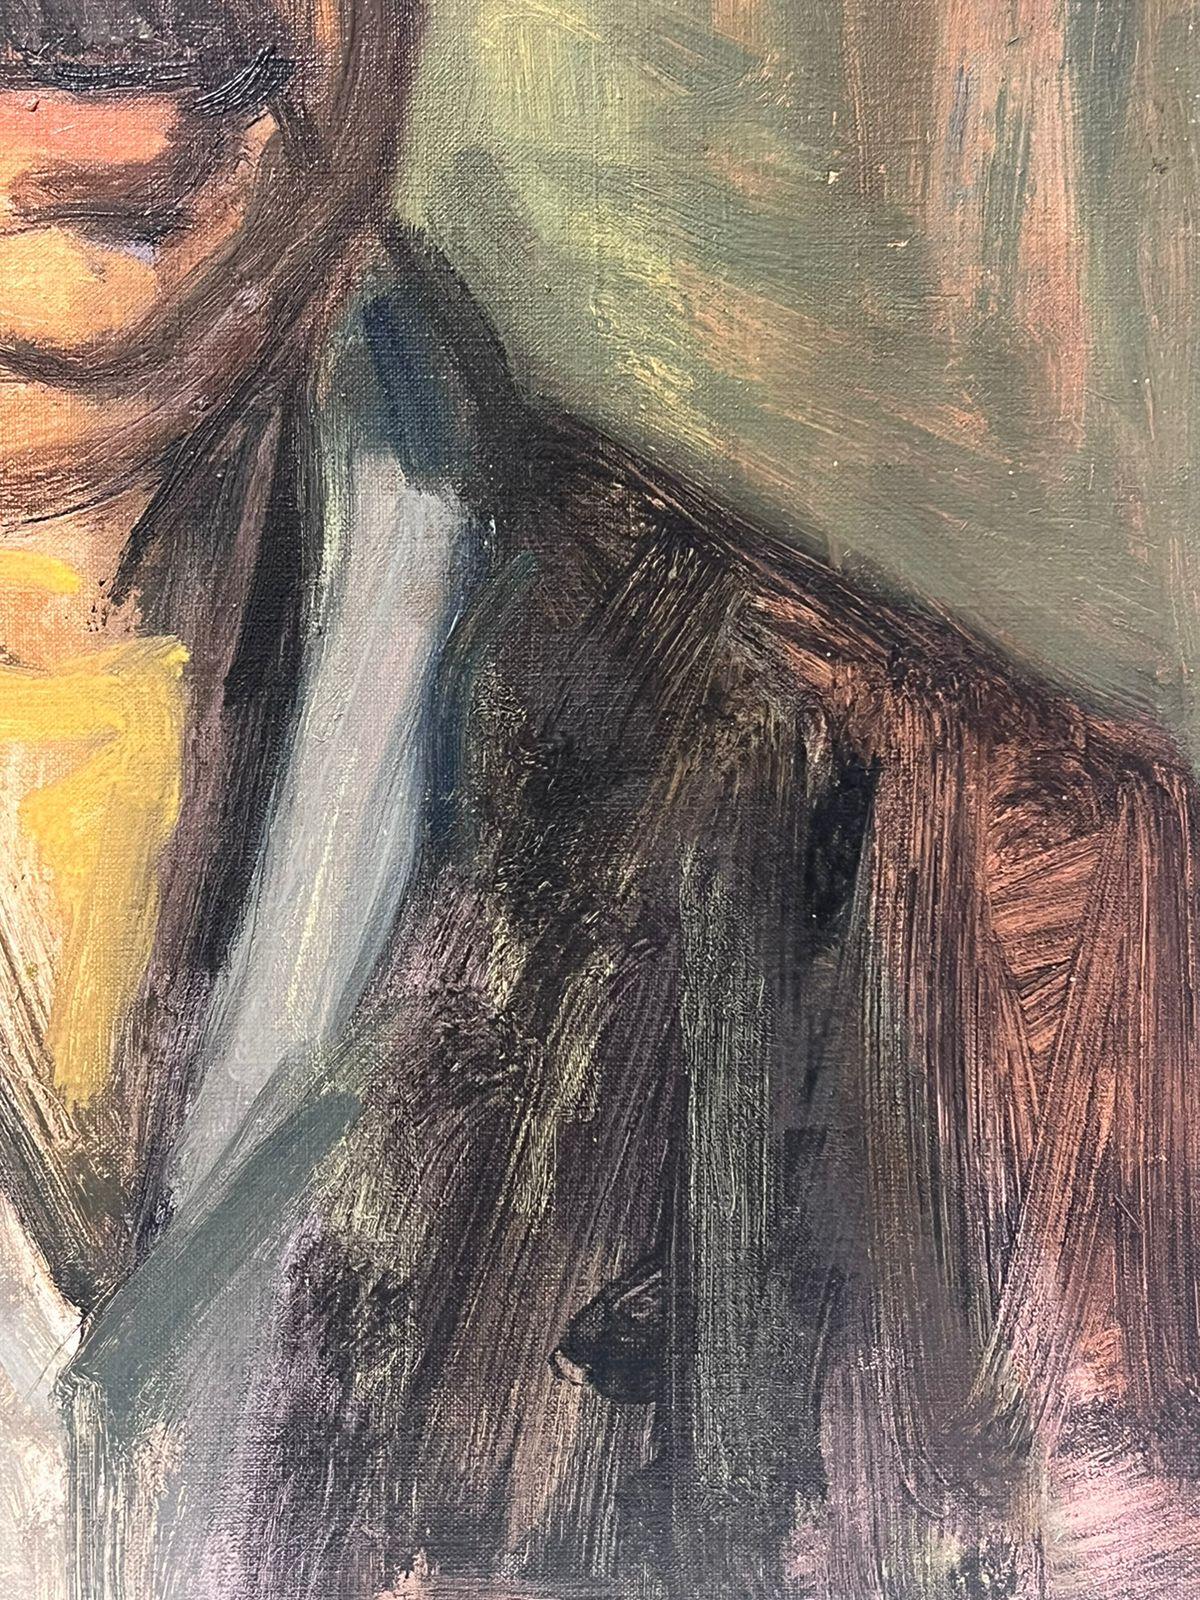 Portrait of Mr. Epstein
by Jacob Markiel (Polish 1911-2008) *See notes signed below oil on canvas, unframed
canvas: 24 x 18 inches
provenance: the artists estate, south of France
condition: very good and sound condition

Jacob Markiel was born into